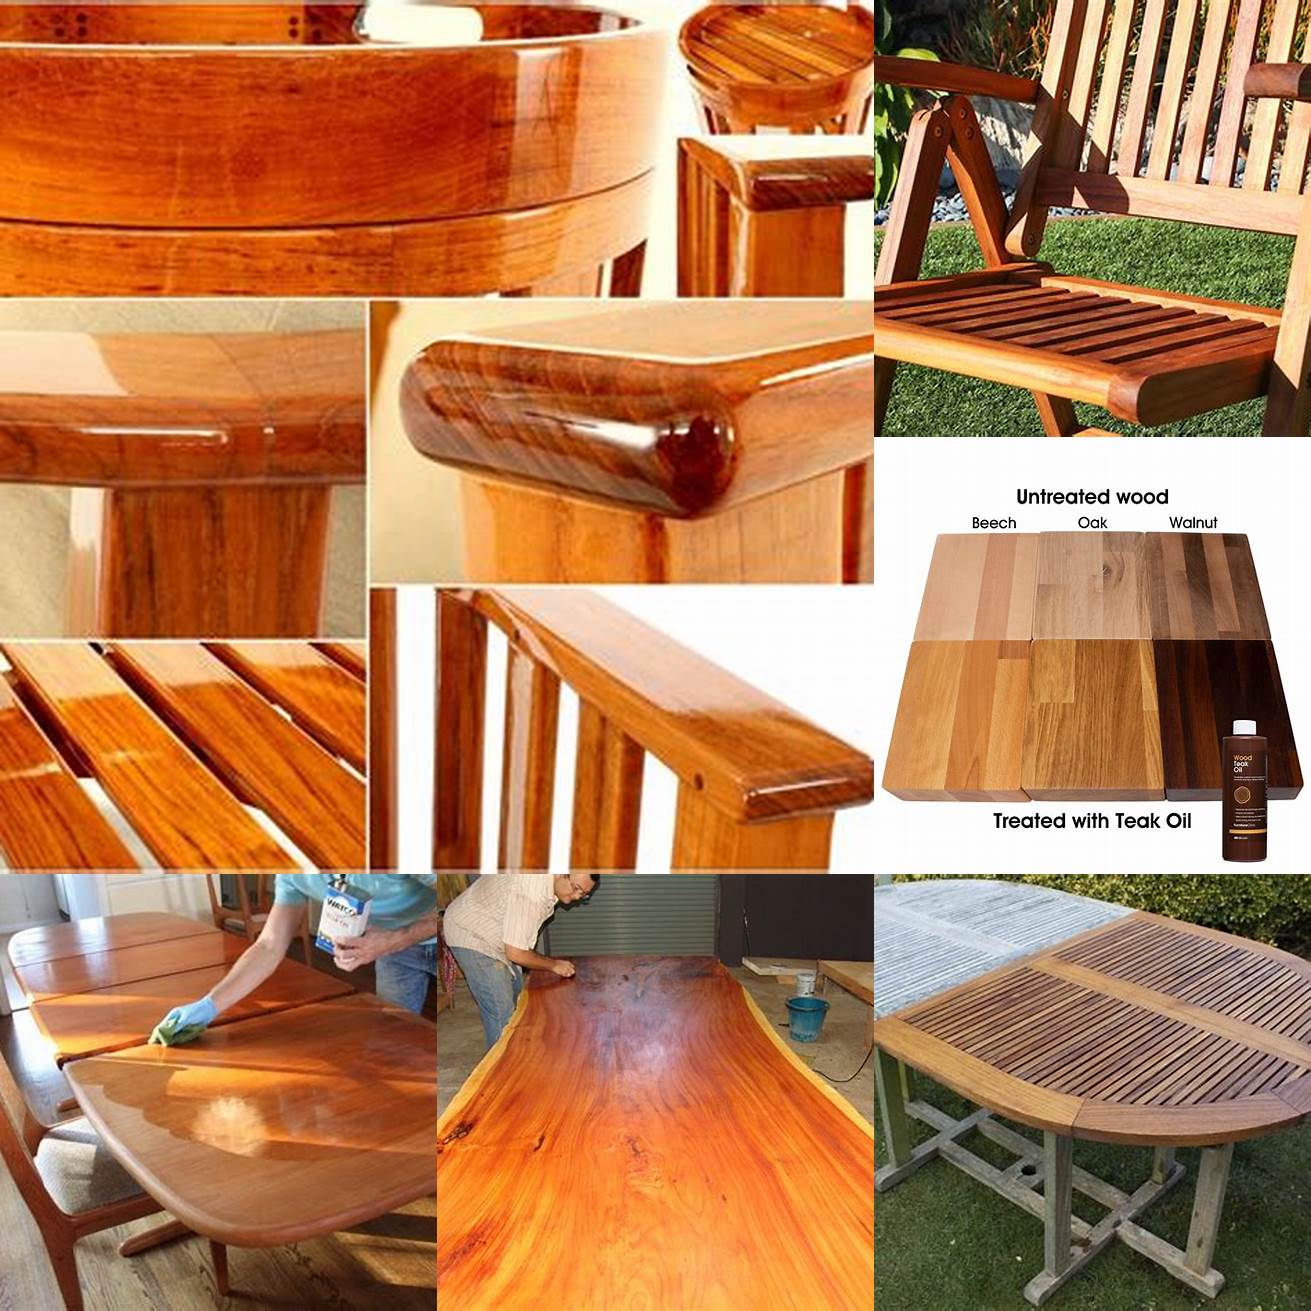 Teak furniture with an oiled finish